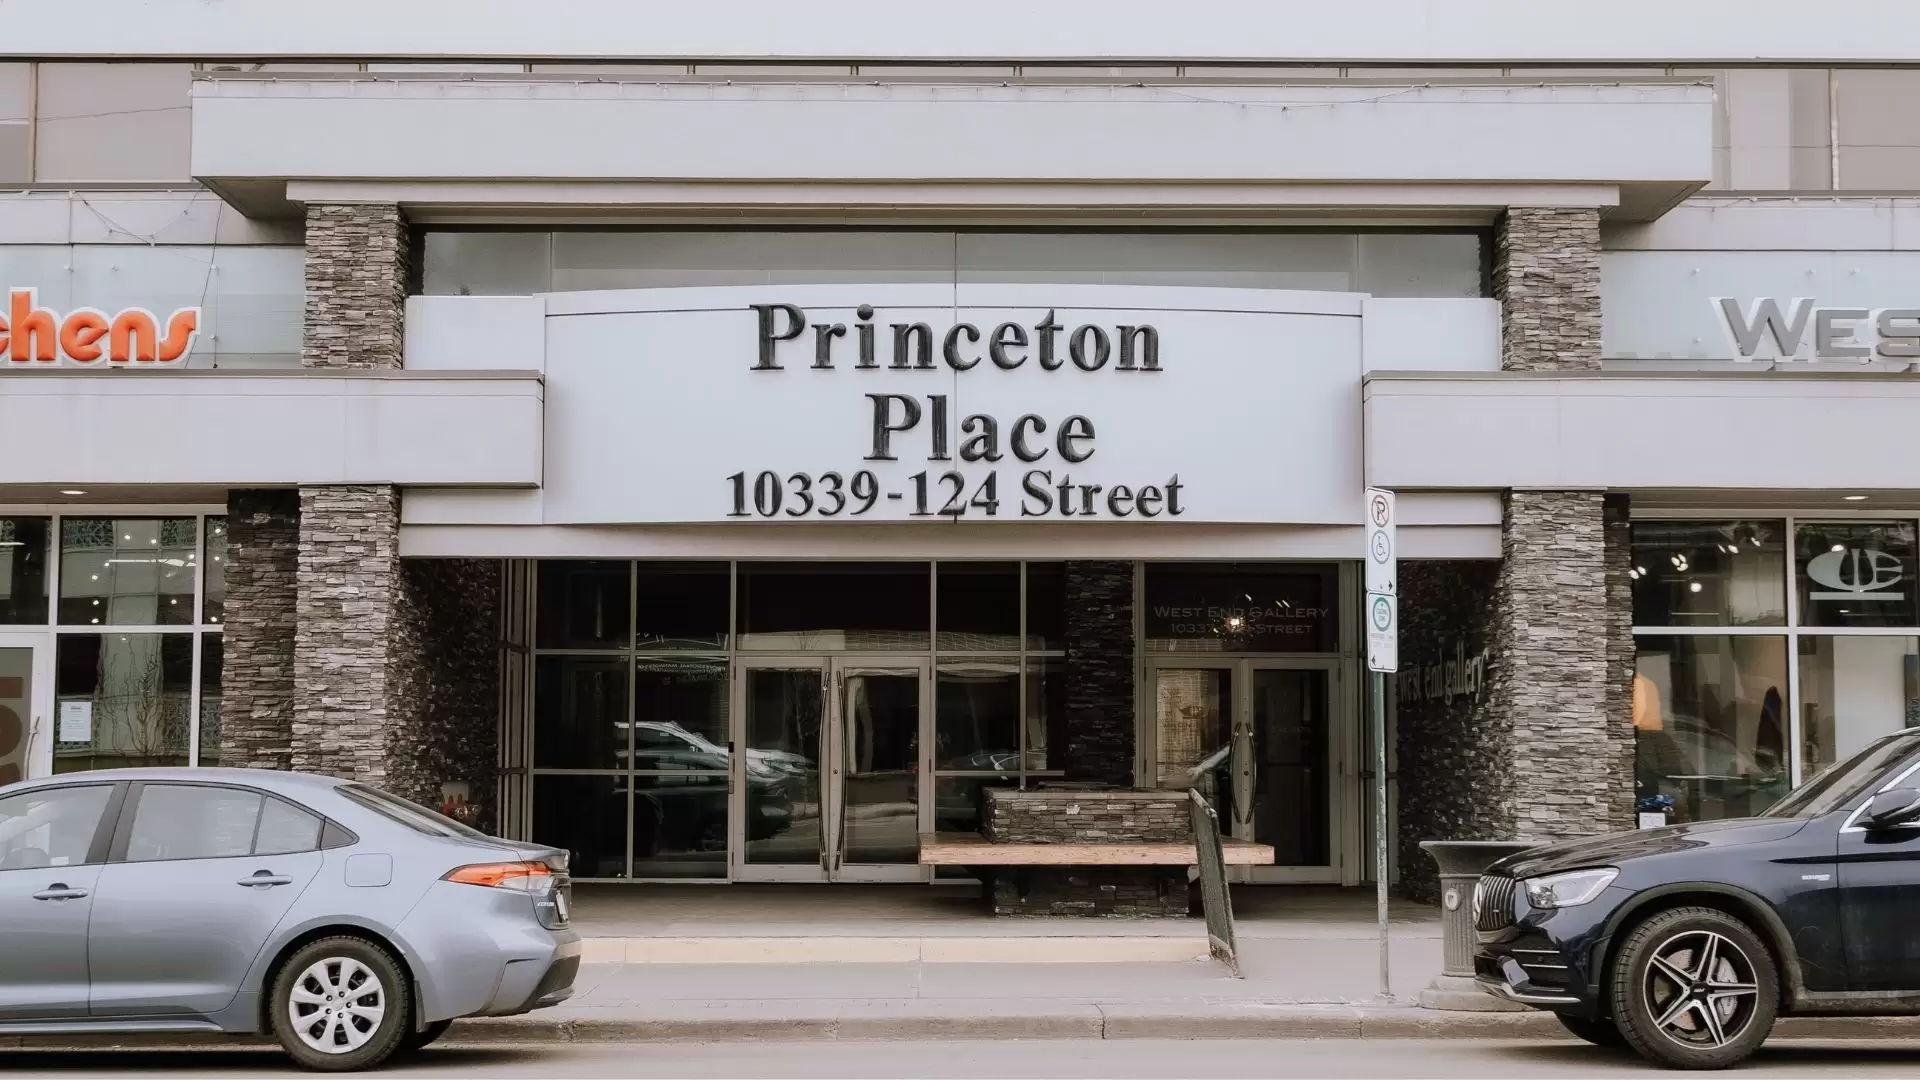 Front entrance of a grey office building with sign that says "Princeton Place 10339 - 124 Street" and two cars parked on the street.